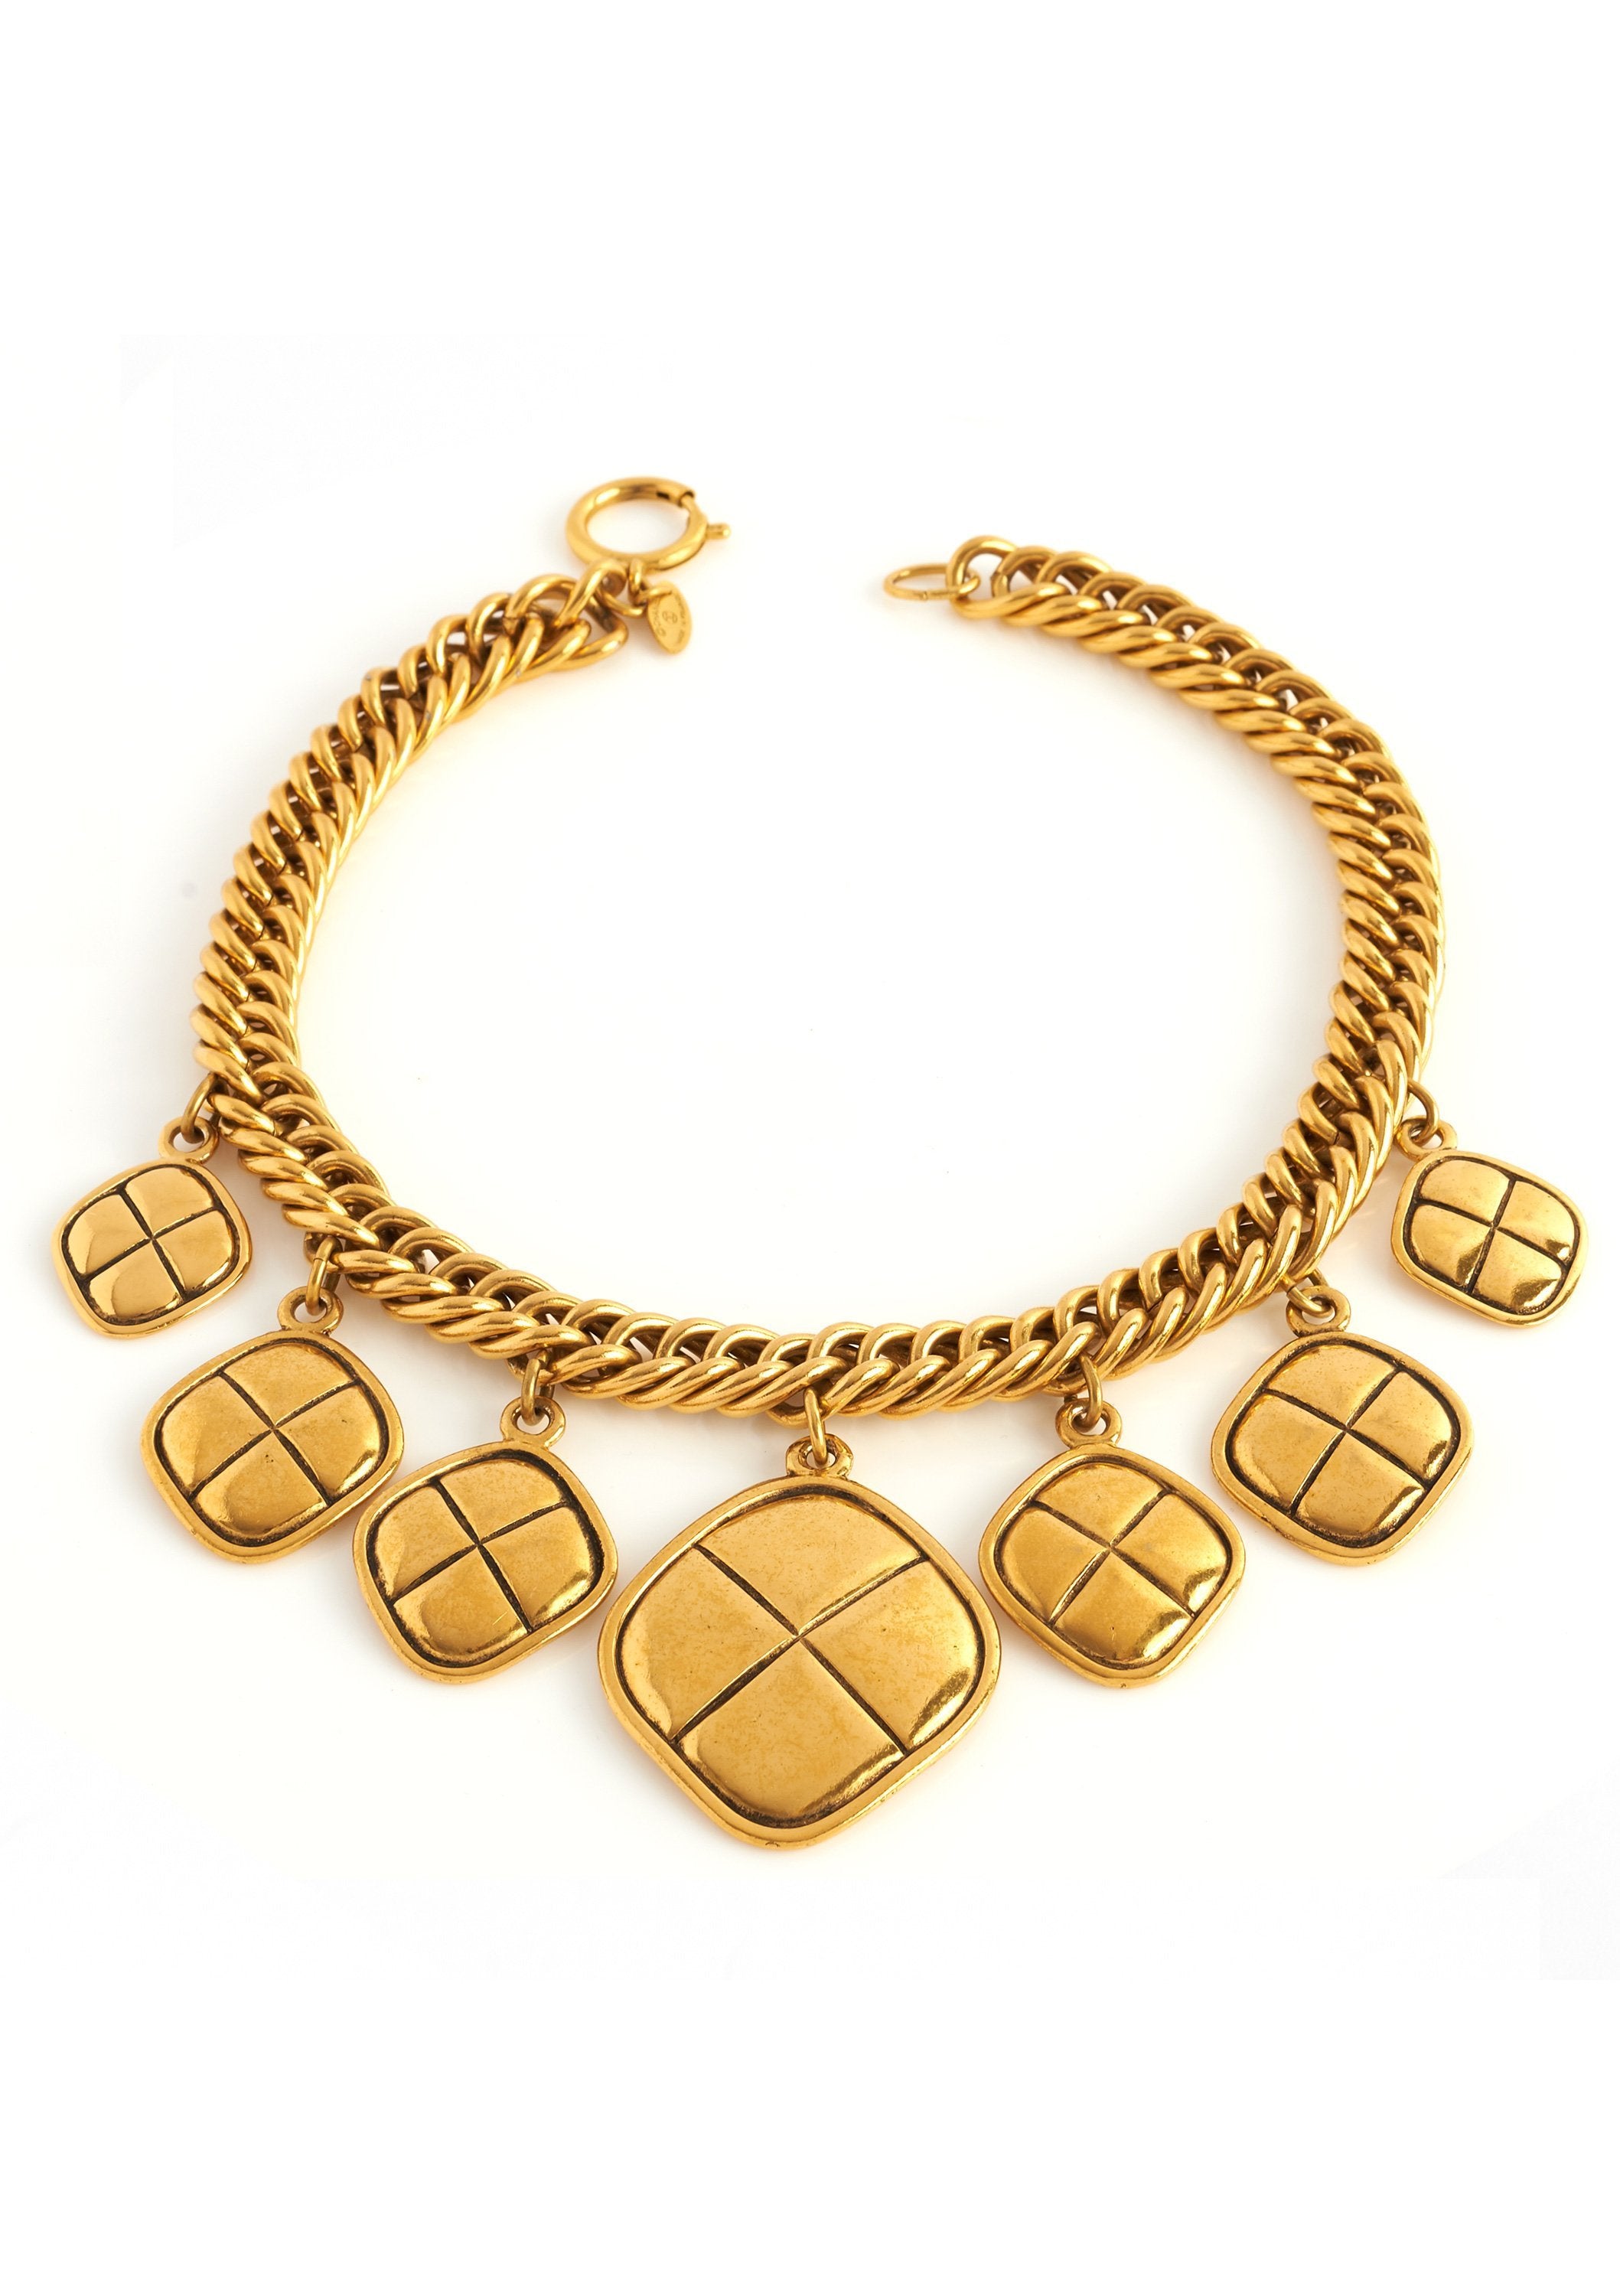 Chanel Matelasse Charm Necklace, Gold Plated, Vintage - 1991